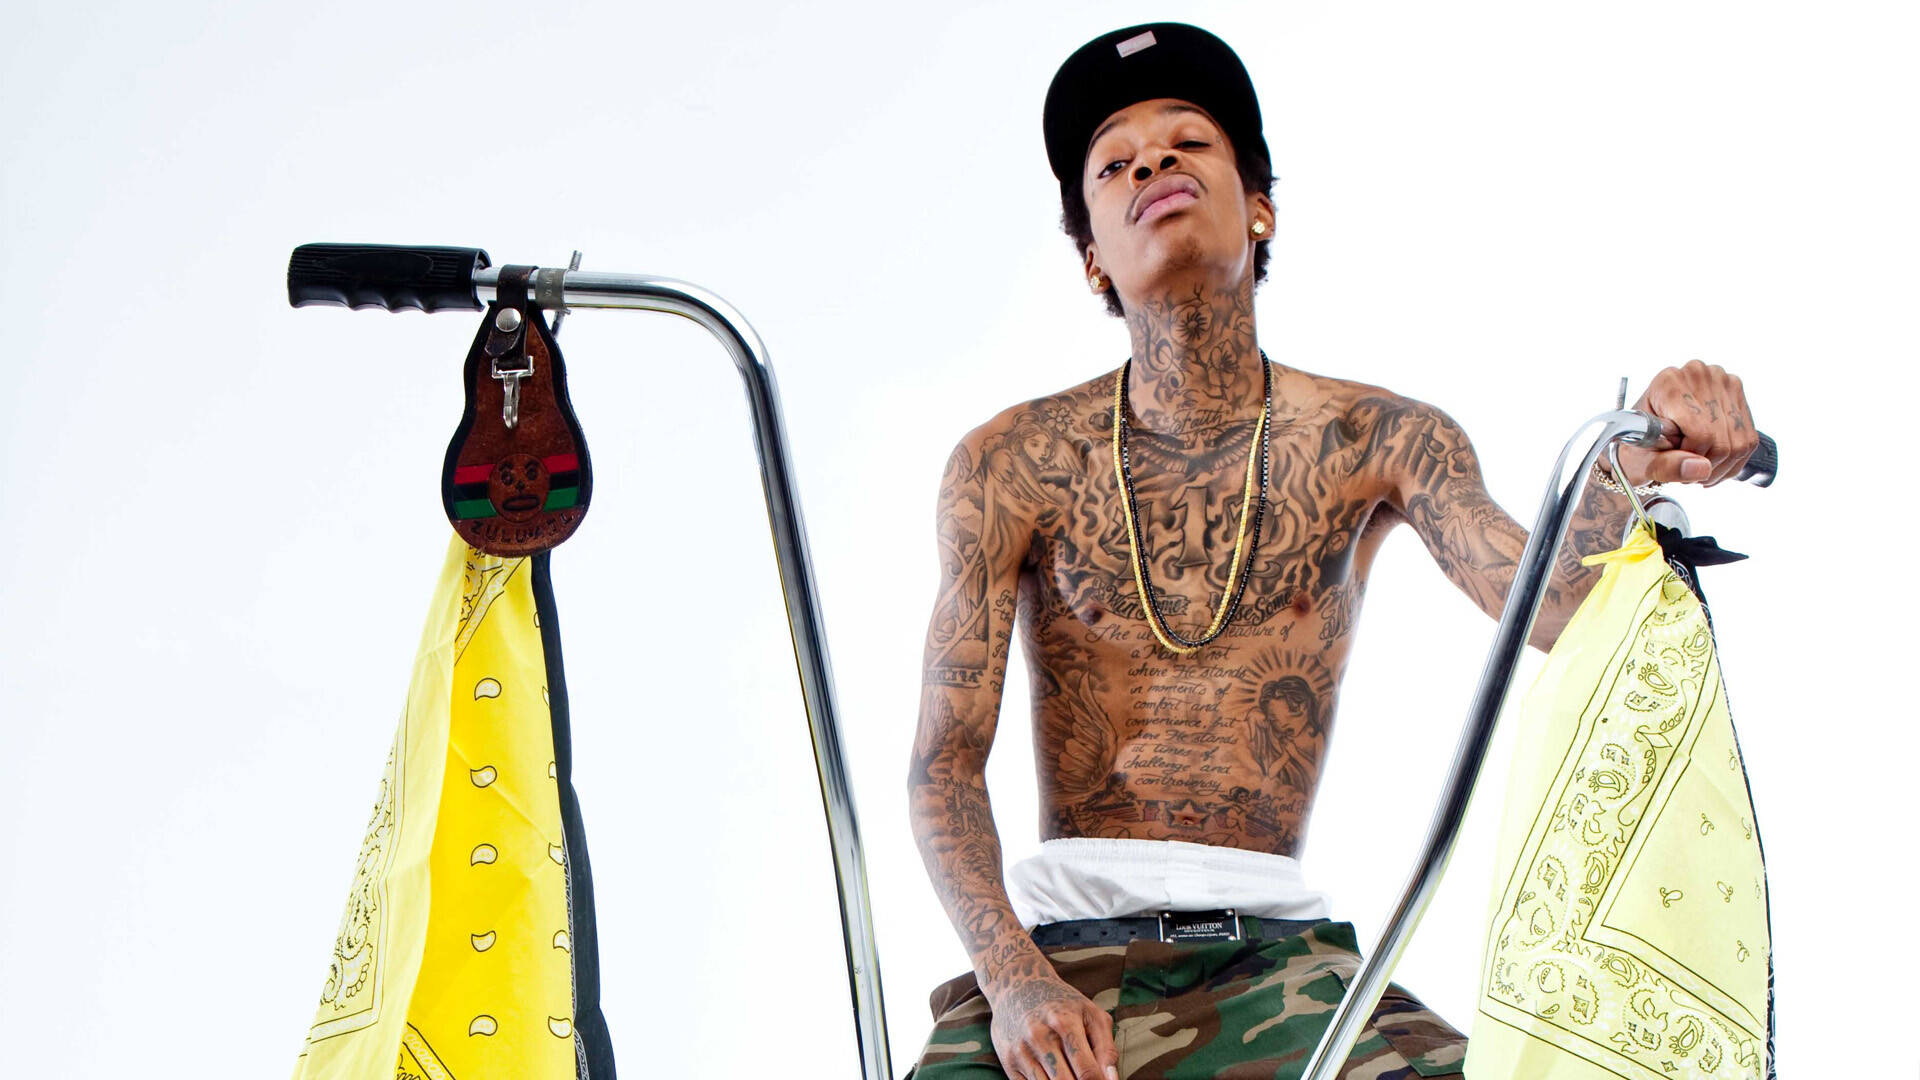 Wiz Khalifa: "You and Your Friends", featuring Snoop Dogg, was released on July 22, 2014. 1920x1080 Full HD Wallpaper.